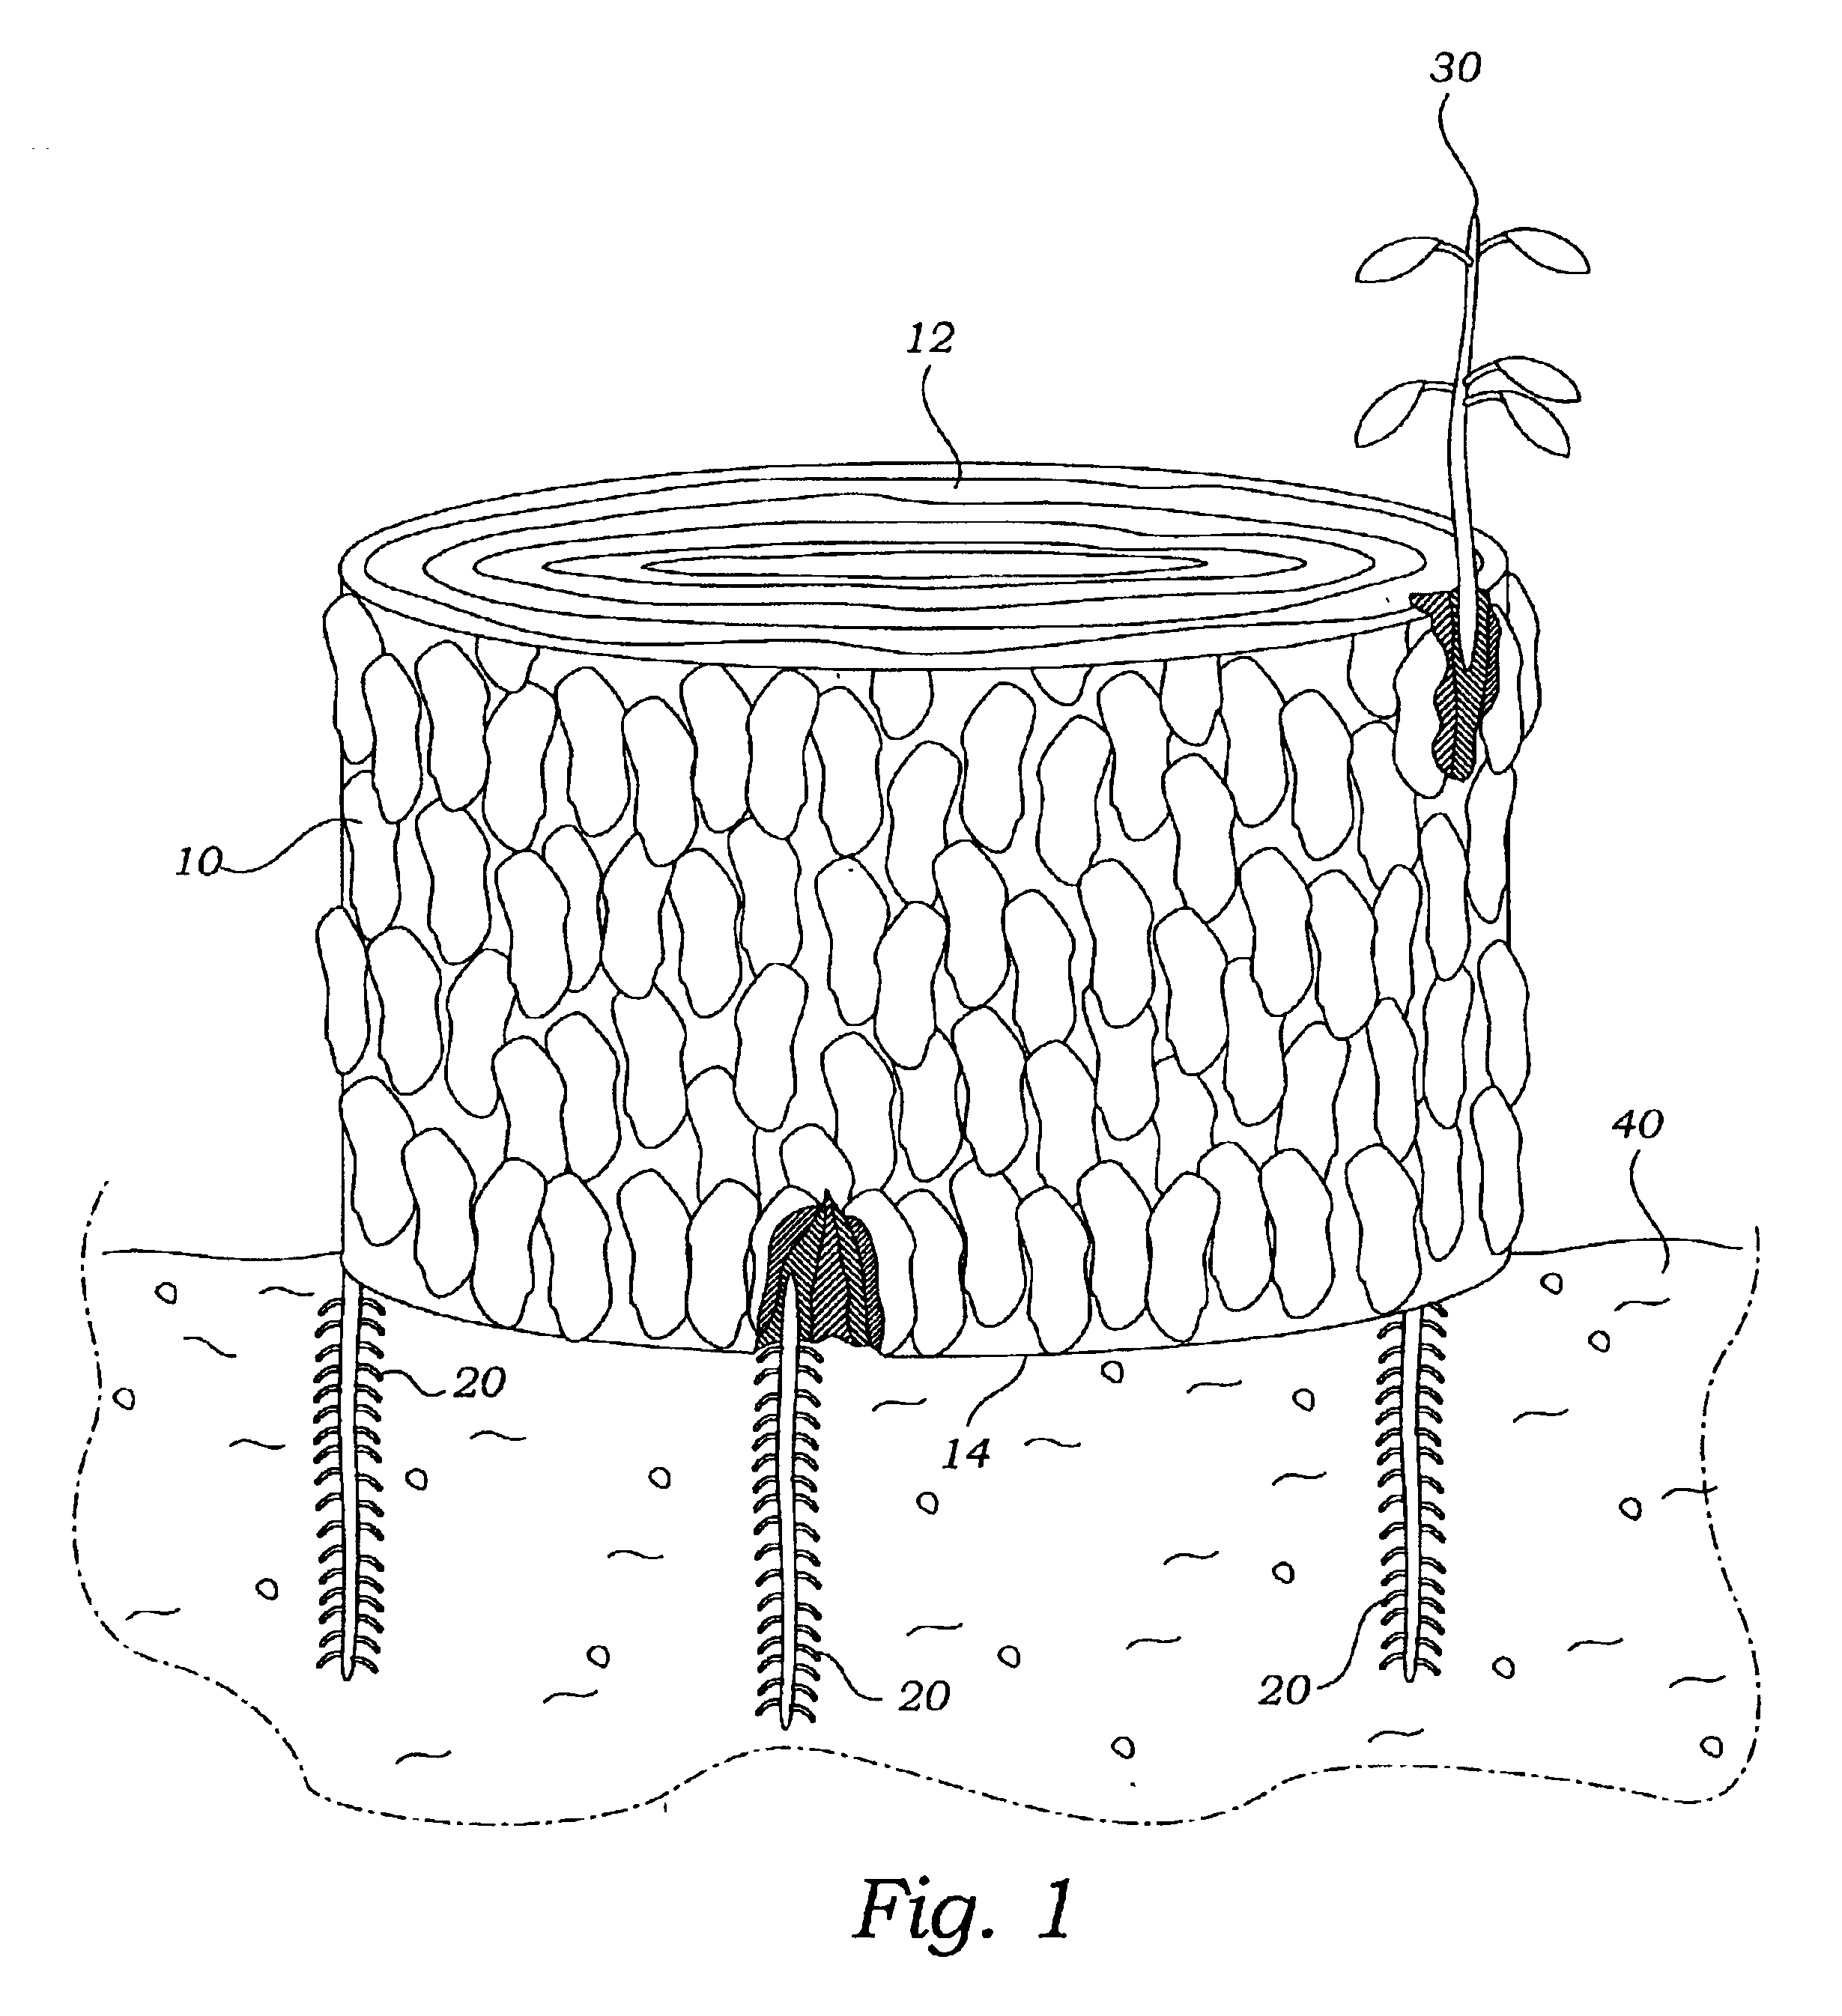 Method of plant propagation using root bark-grafting to sections